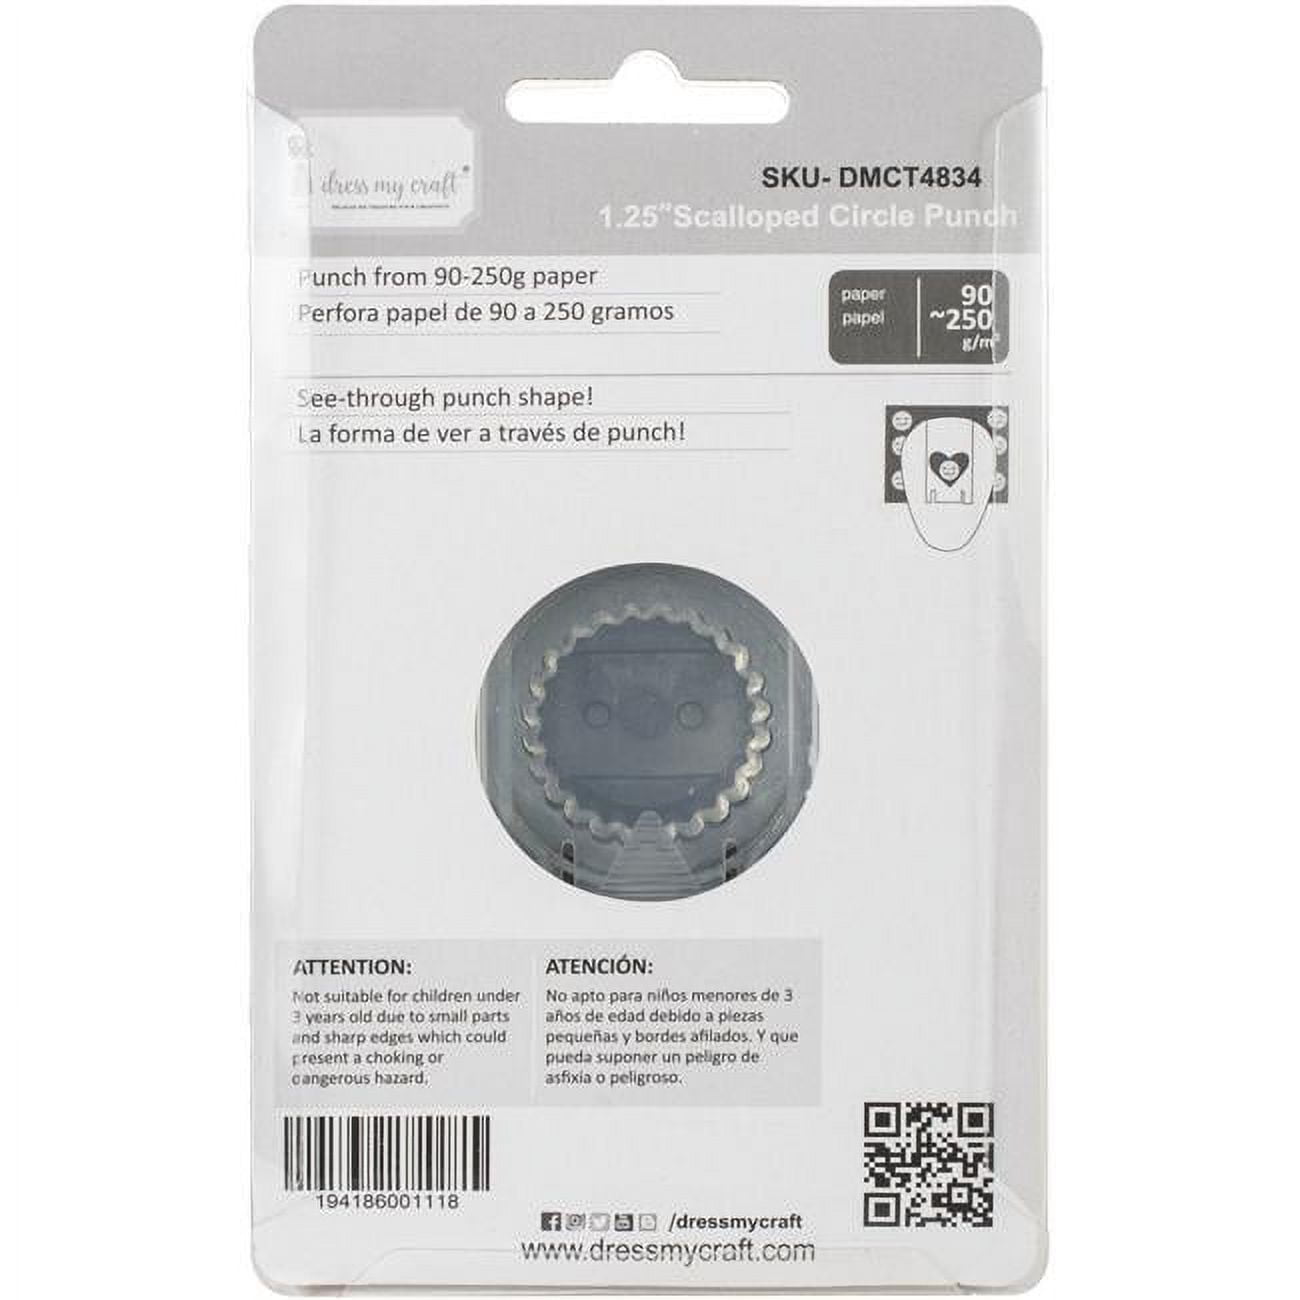 Dress My Craft Designer Punch-Rounded Tag, 1 count - Kroger